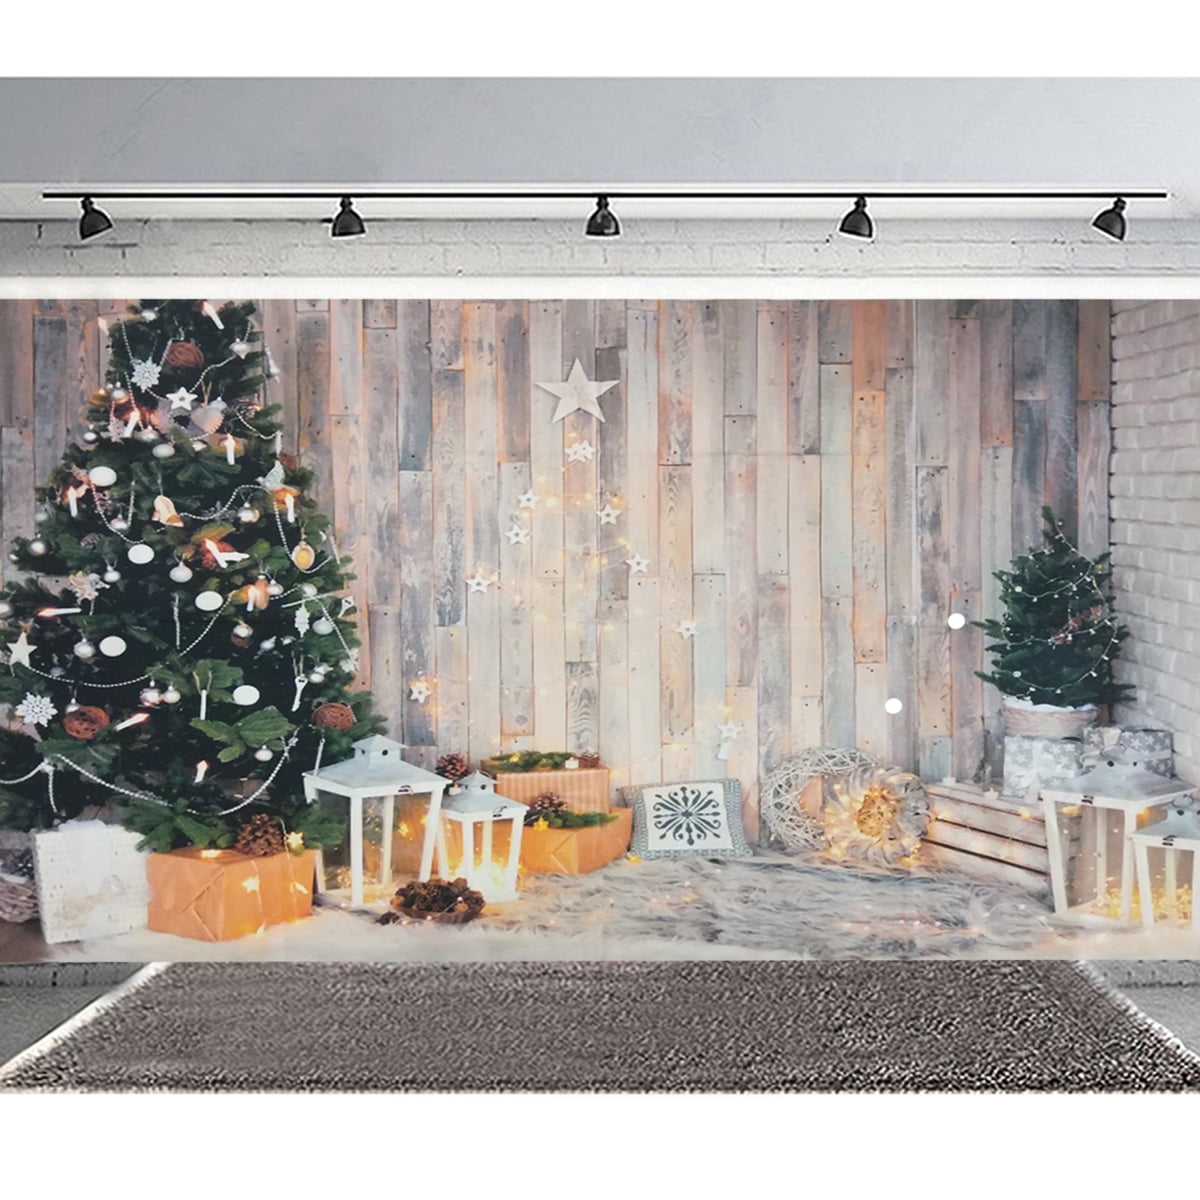 Merry Christmas Cloth Photo Backdrops Xmas Photography Background Party ...